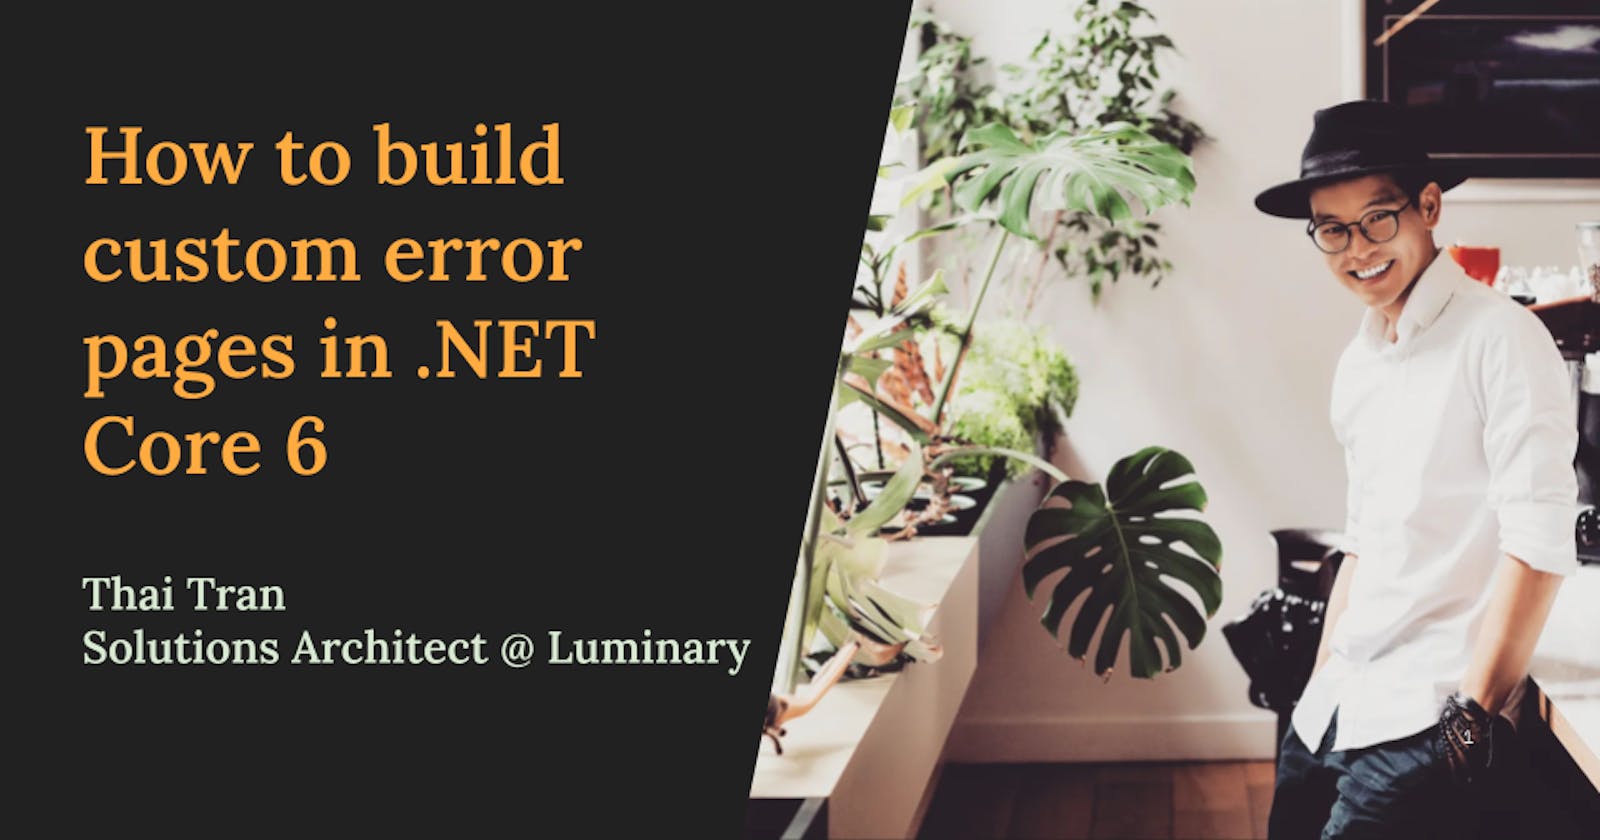 How to build custom error pages in .NET Core 6